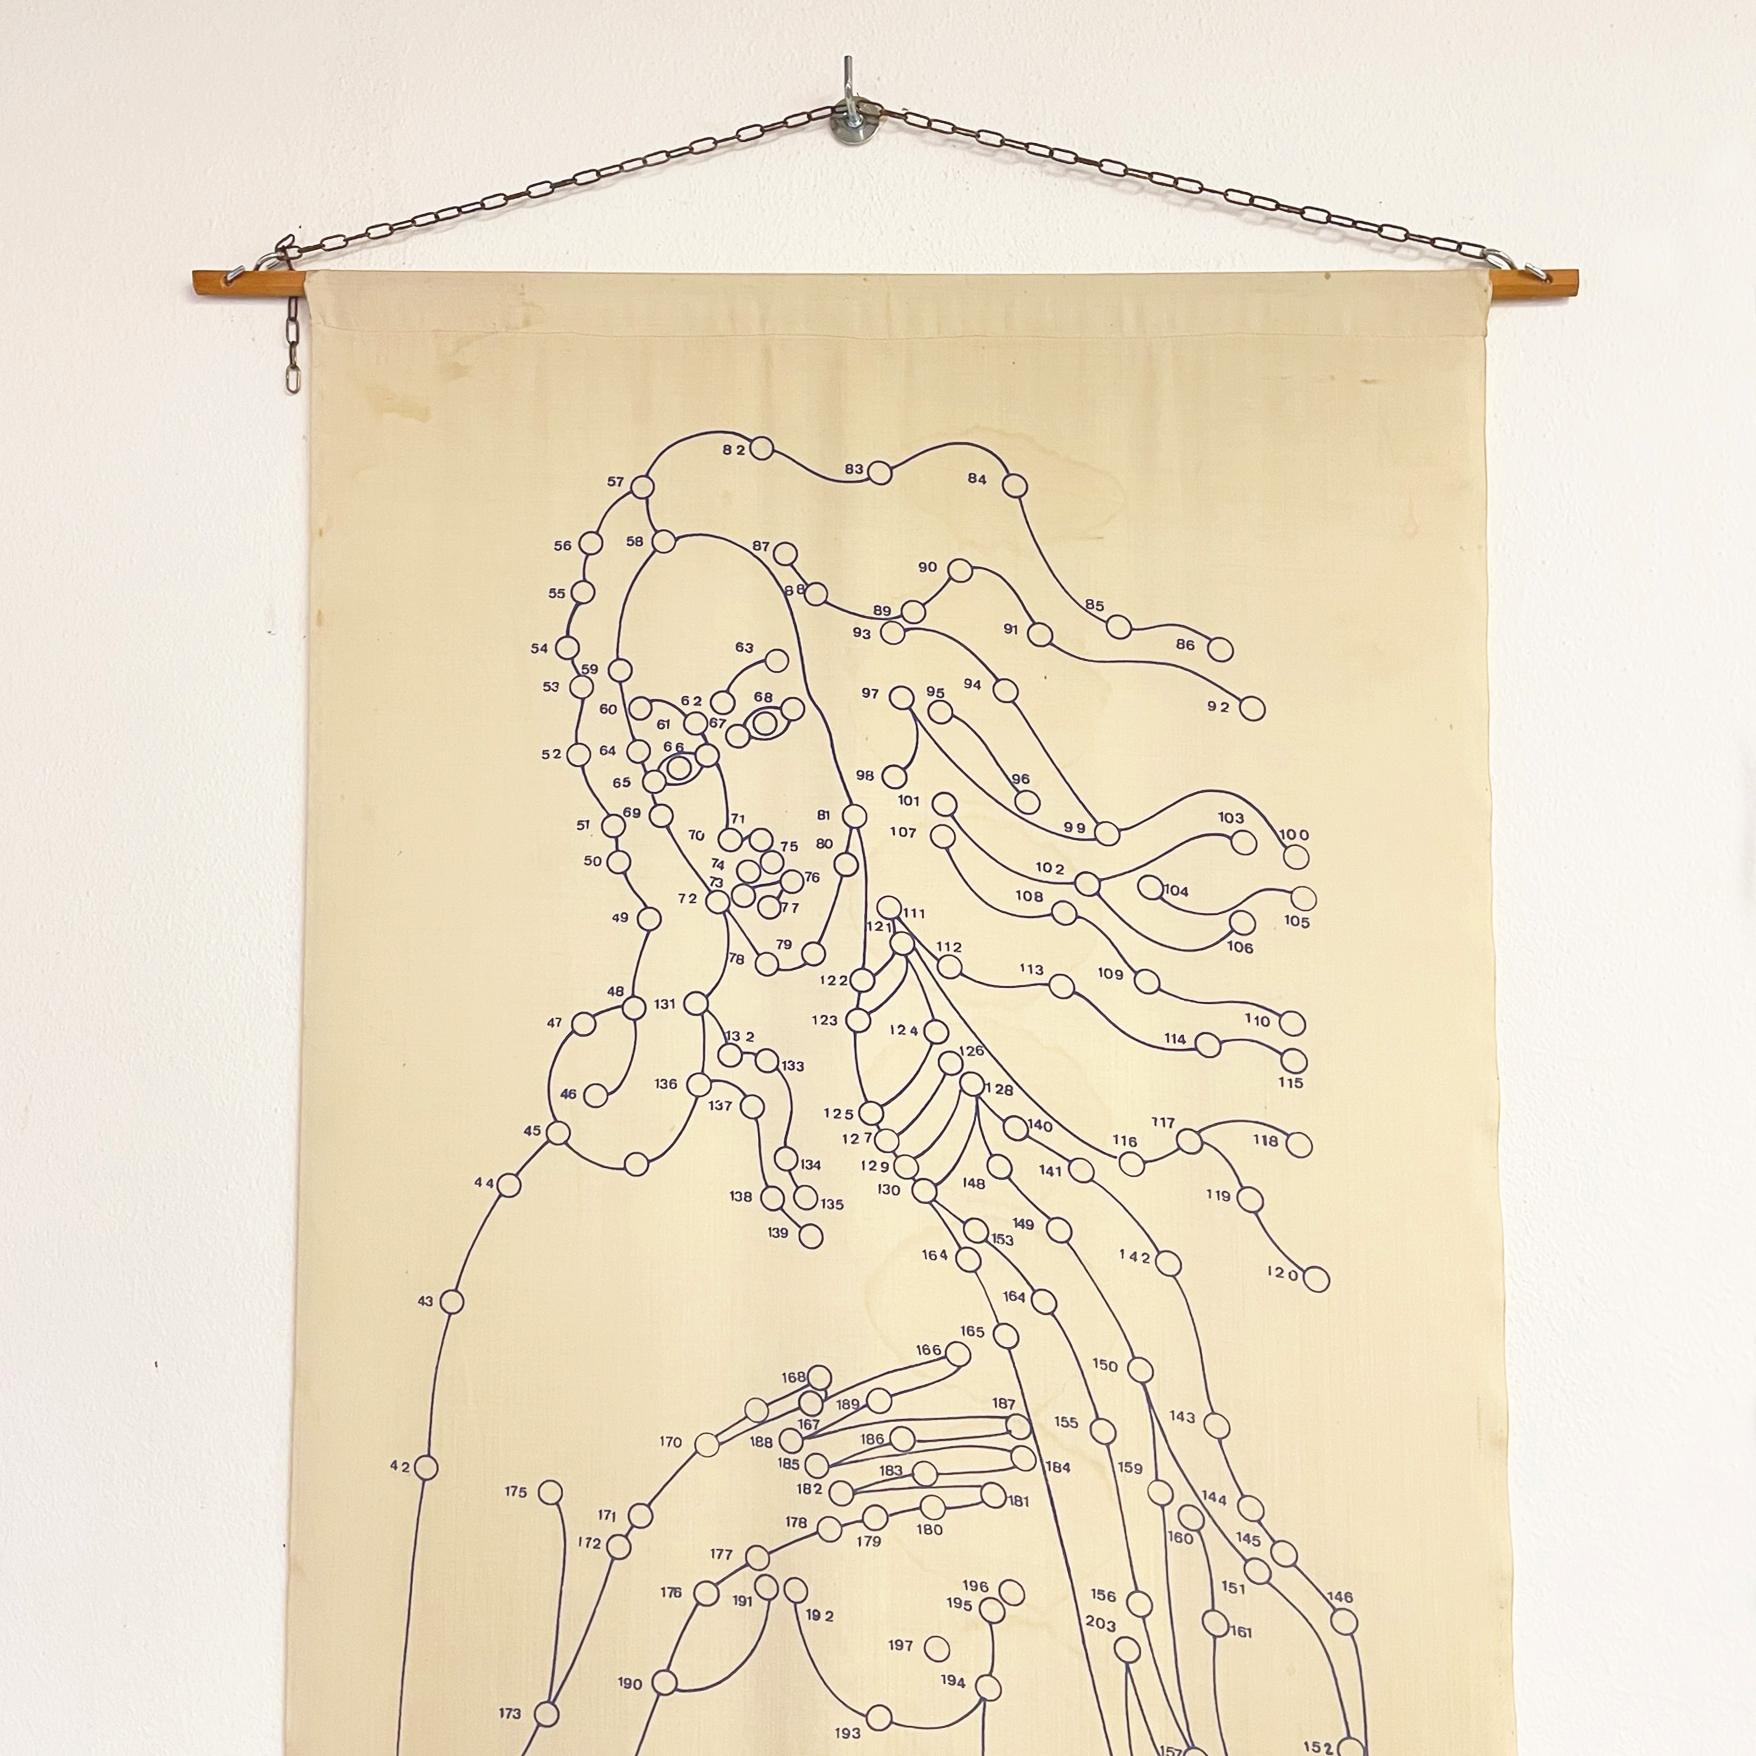 Italian Mid-Century Modern wall print on fabric of Botticelli's Venus by Pino Tovaglia, 1969
Wall fabric print supported by two round section wooden rods on the top and bottom. The print features an outline illustration with numbered dots of